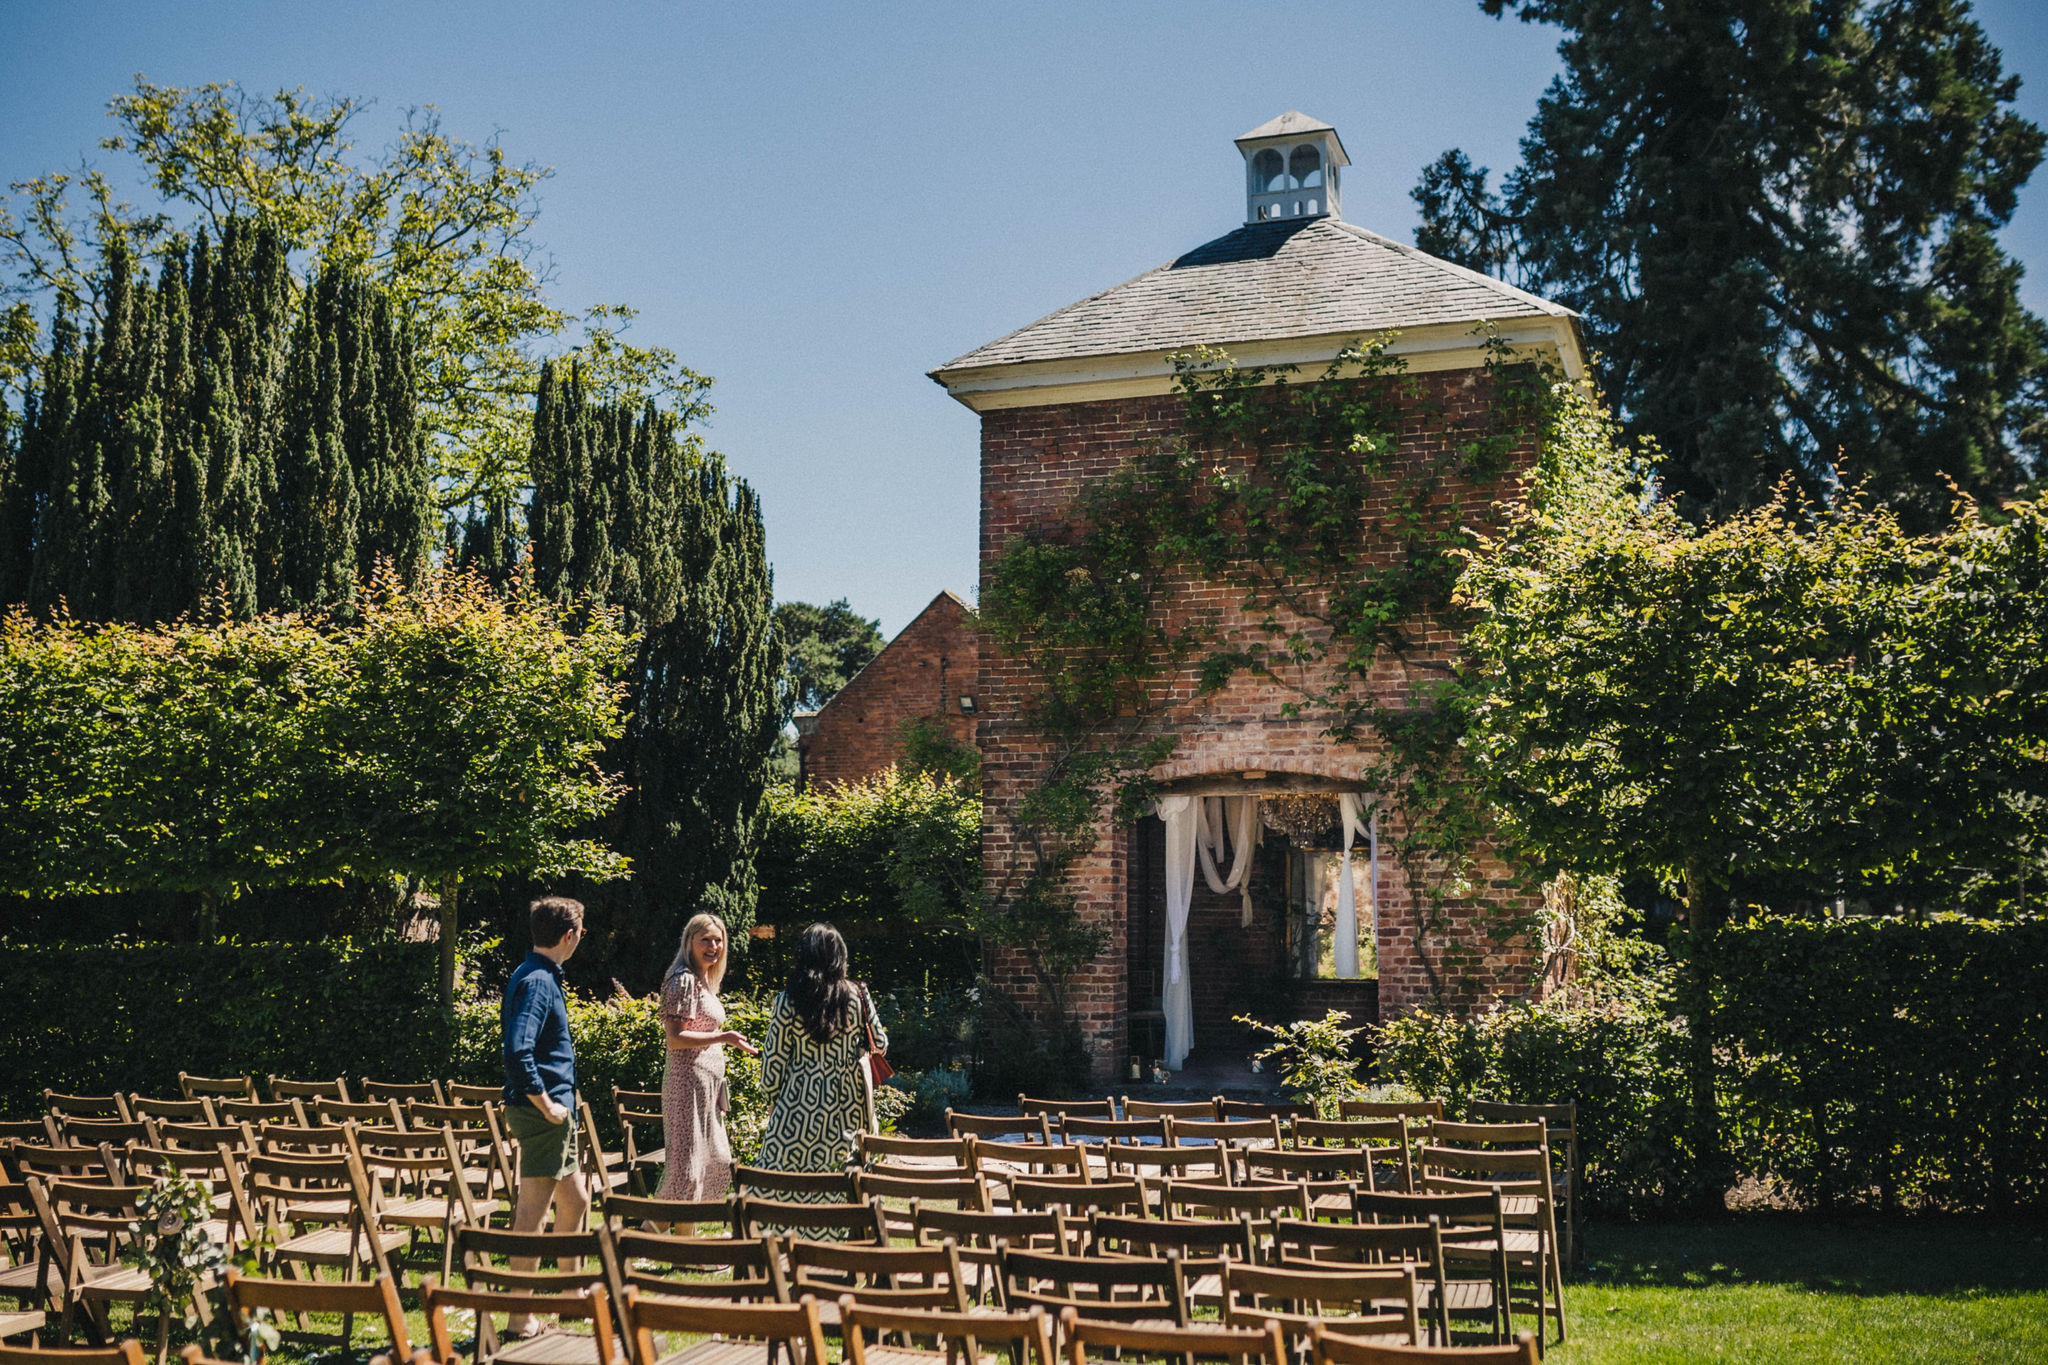 A large red brick dovecote sits amongst landscaped gardens under a clear blue sky with climbing pink roses up the height of its walls